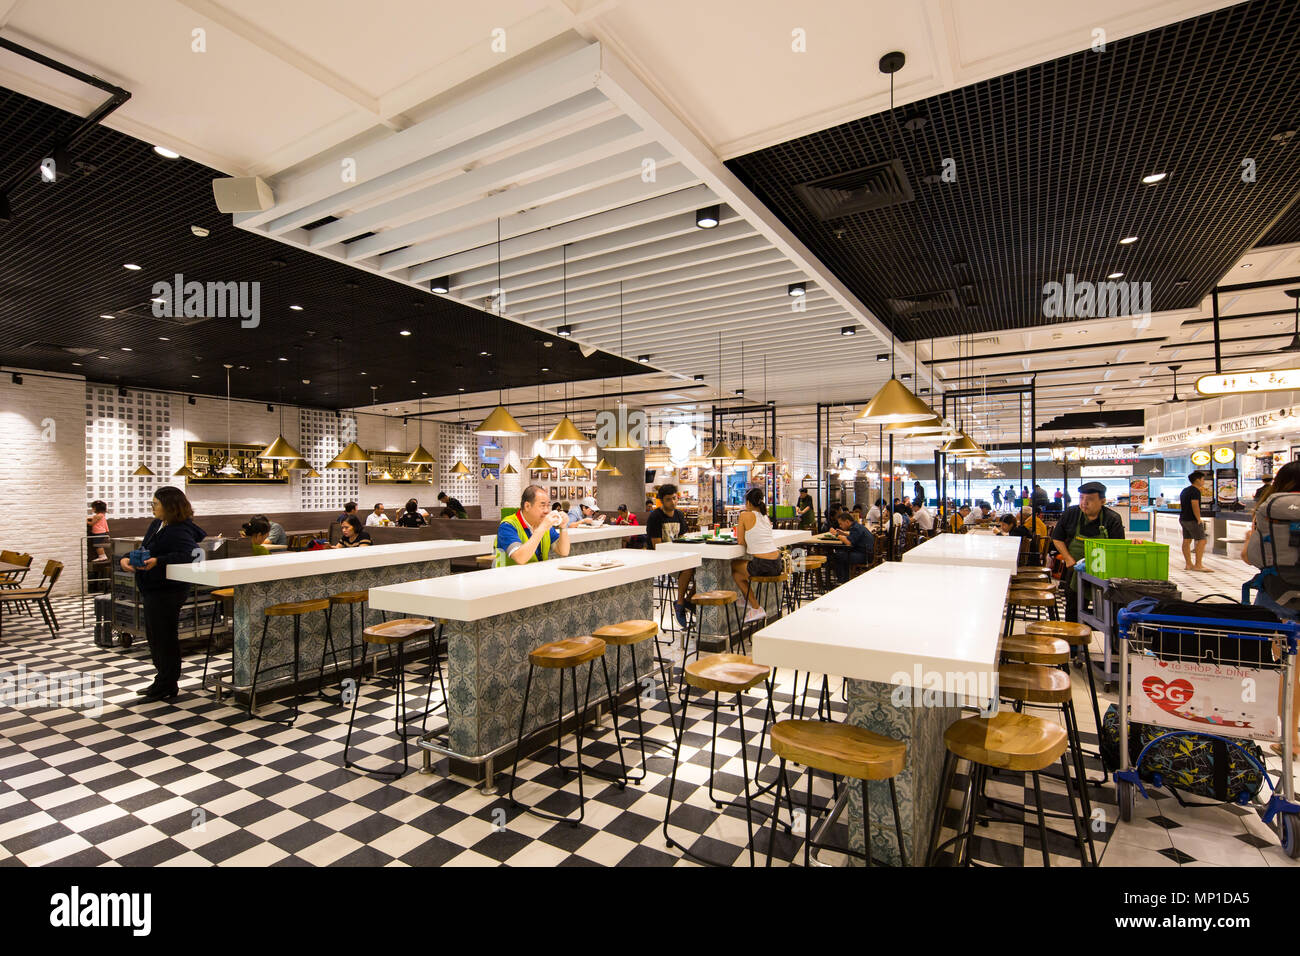 Interior Design Of Food Emporium Or Commonly Know As Food